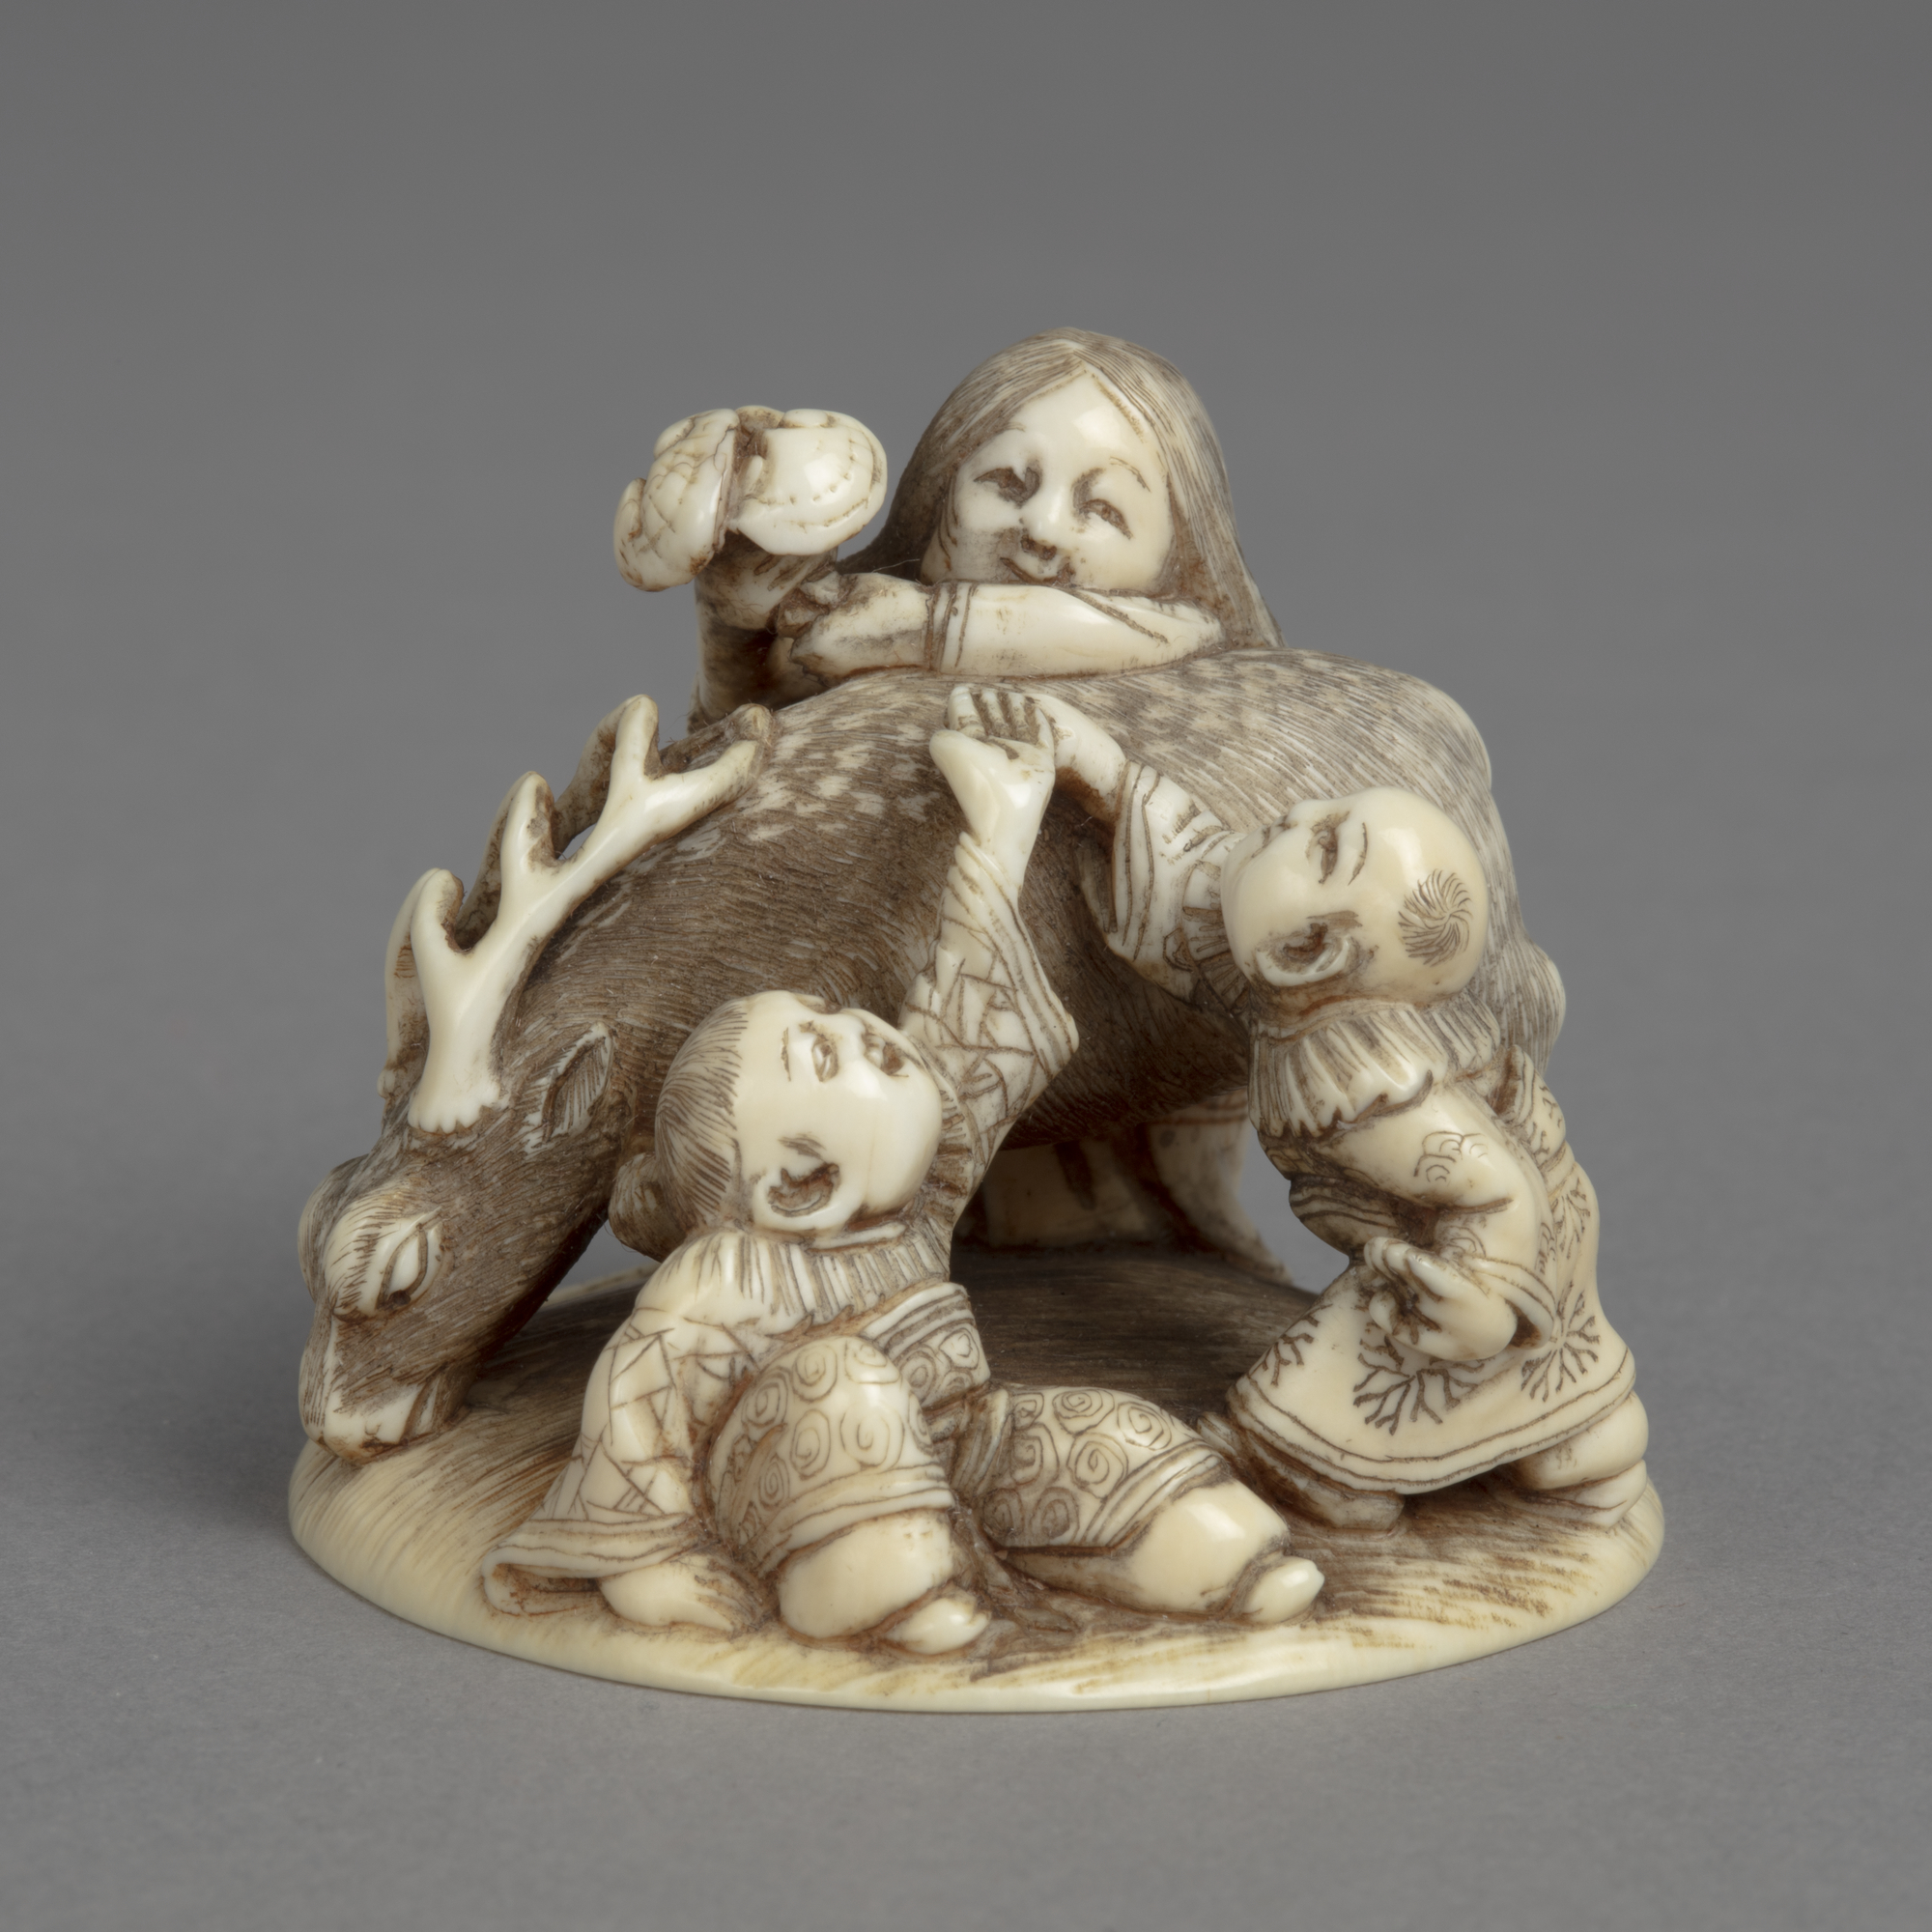 A Japanese ivory okimono ornament of a woman passing the Fungus of Immortality over a deer to two boys in Chinese dress.